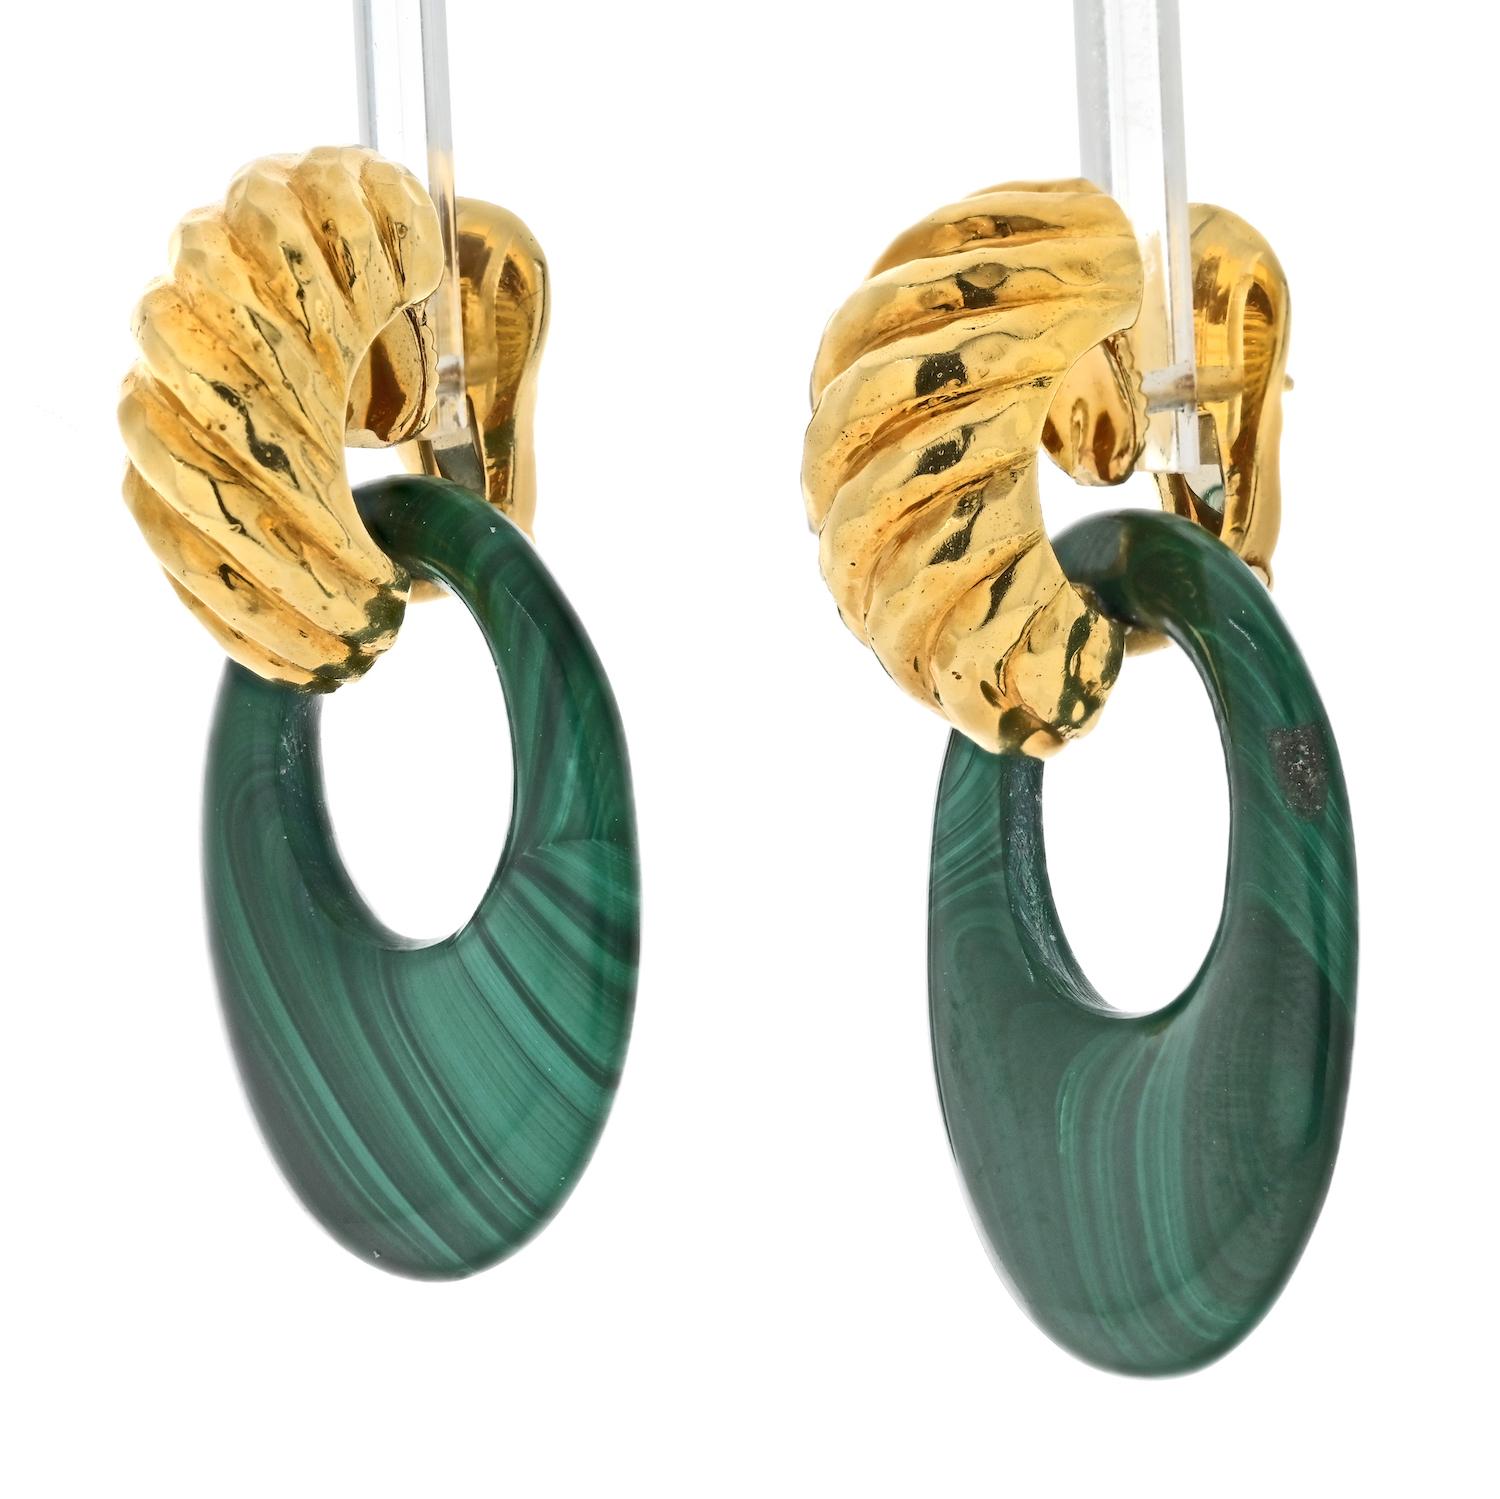 The David Webb 18K Yellow Gold Malachite Door Knockers Earrings are a stunning example of the designer's creativity and attention to detail. These earrings feature a door knocker design, with malachite stones suspended from a shrimp style fluted